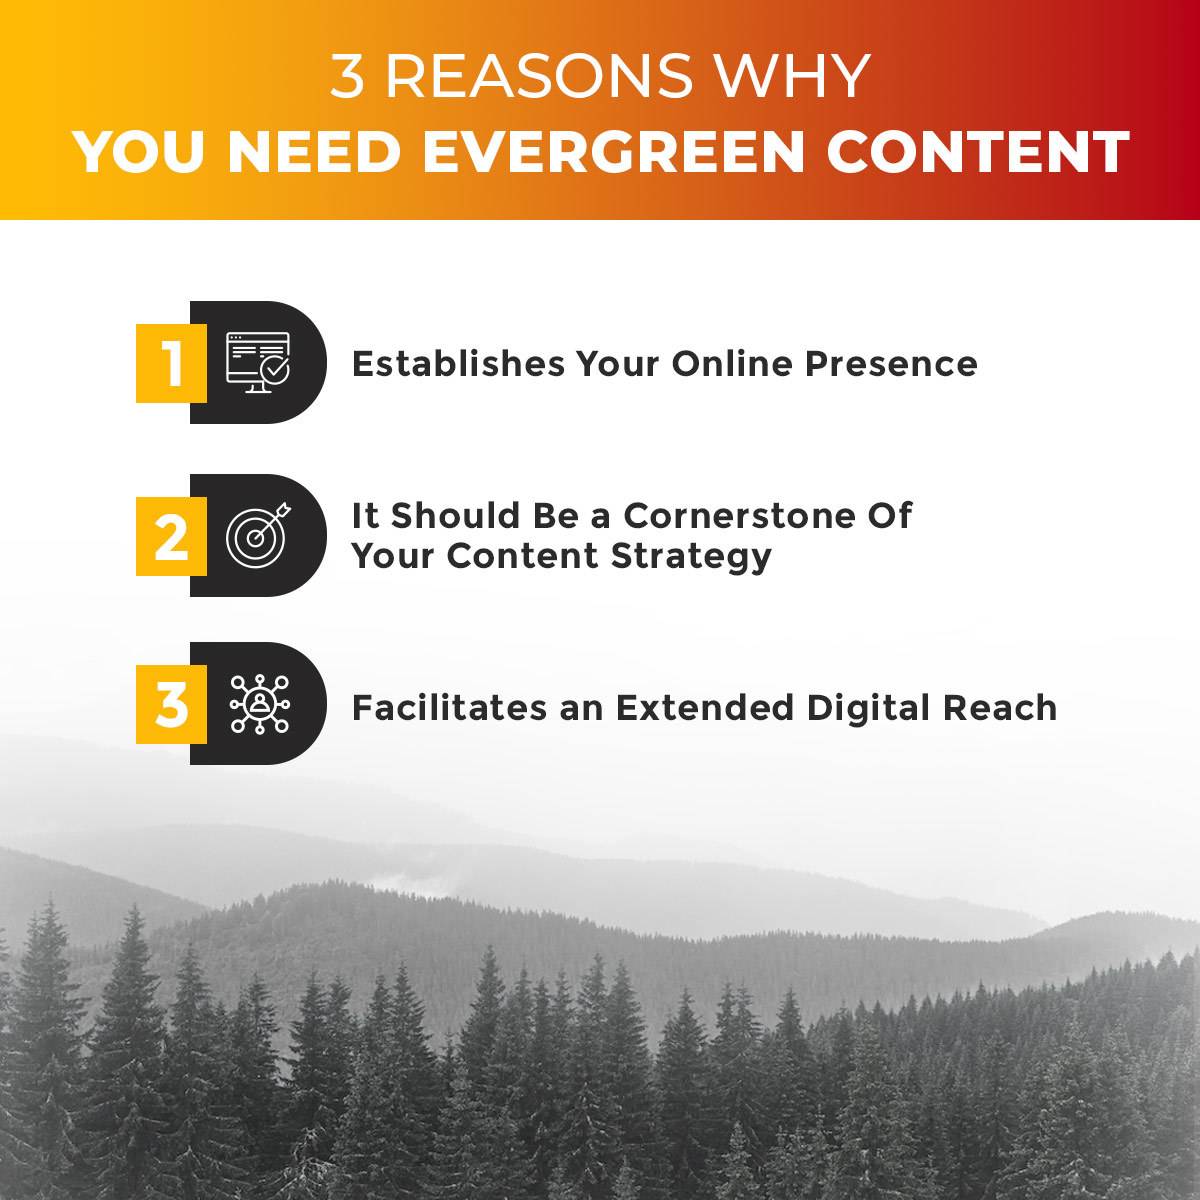 3 Reasons Why You Need Evergreen Content